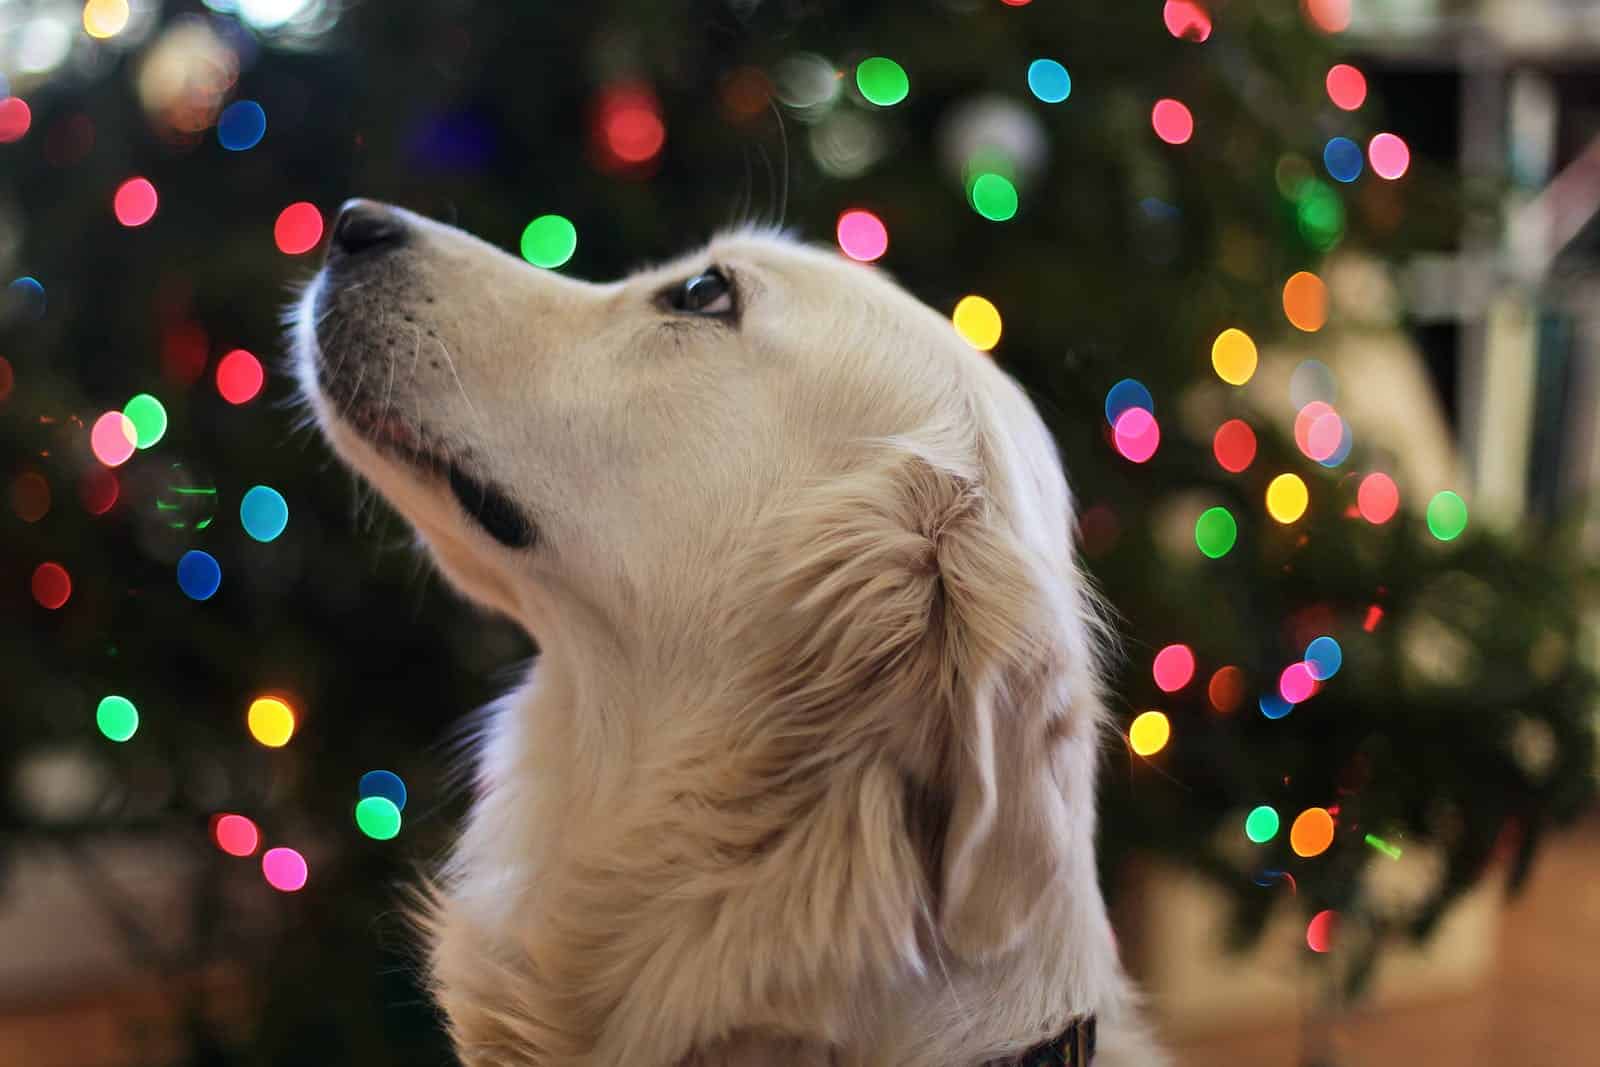 Golden Retriever dog with holiday themed background